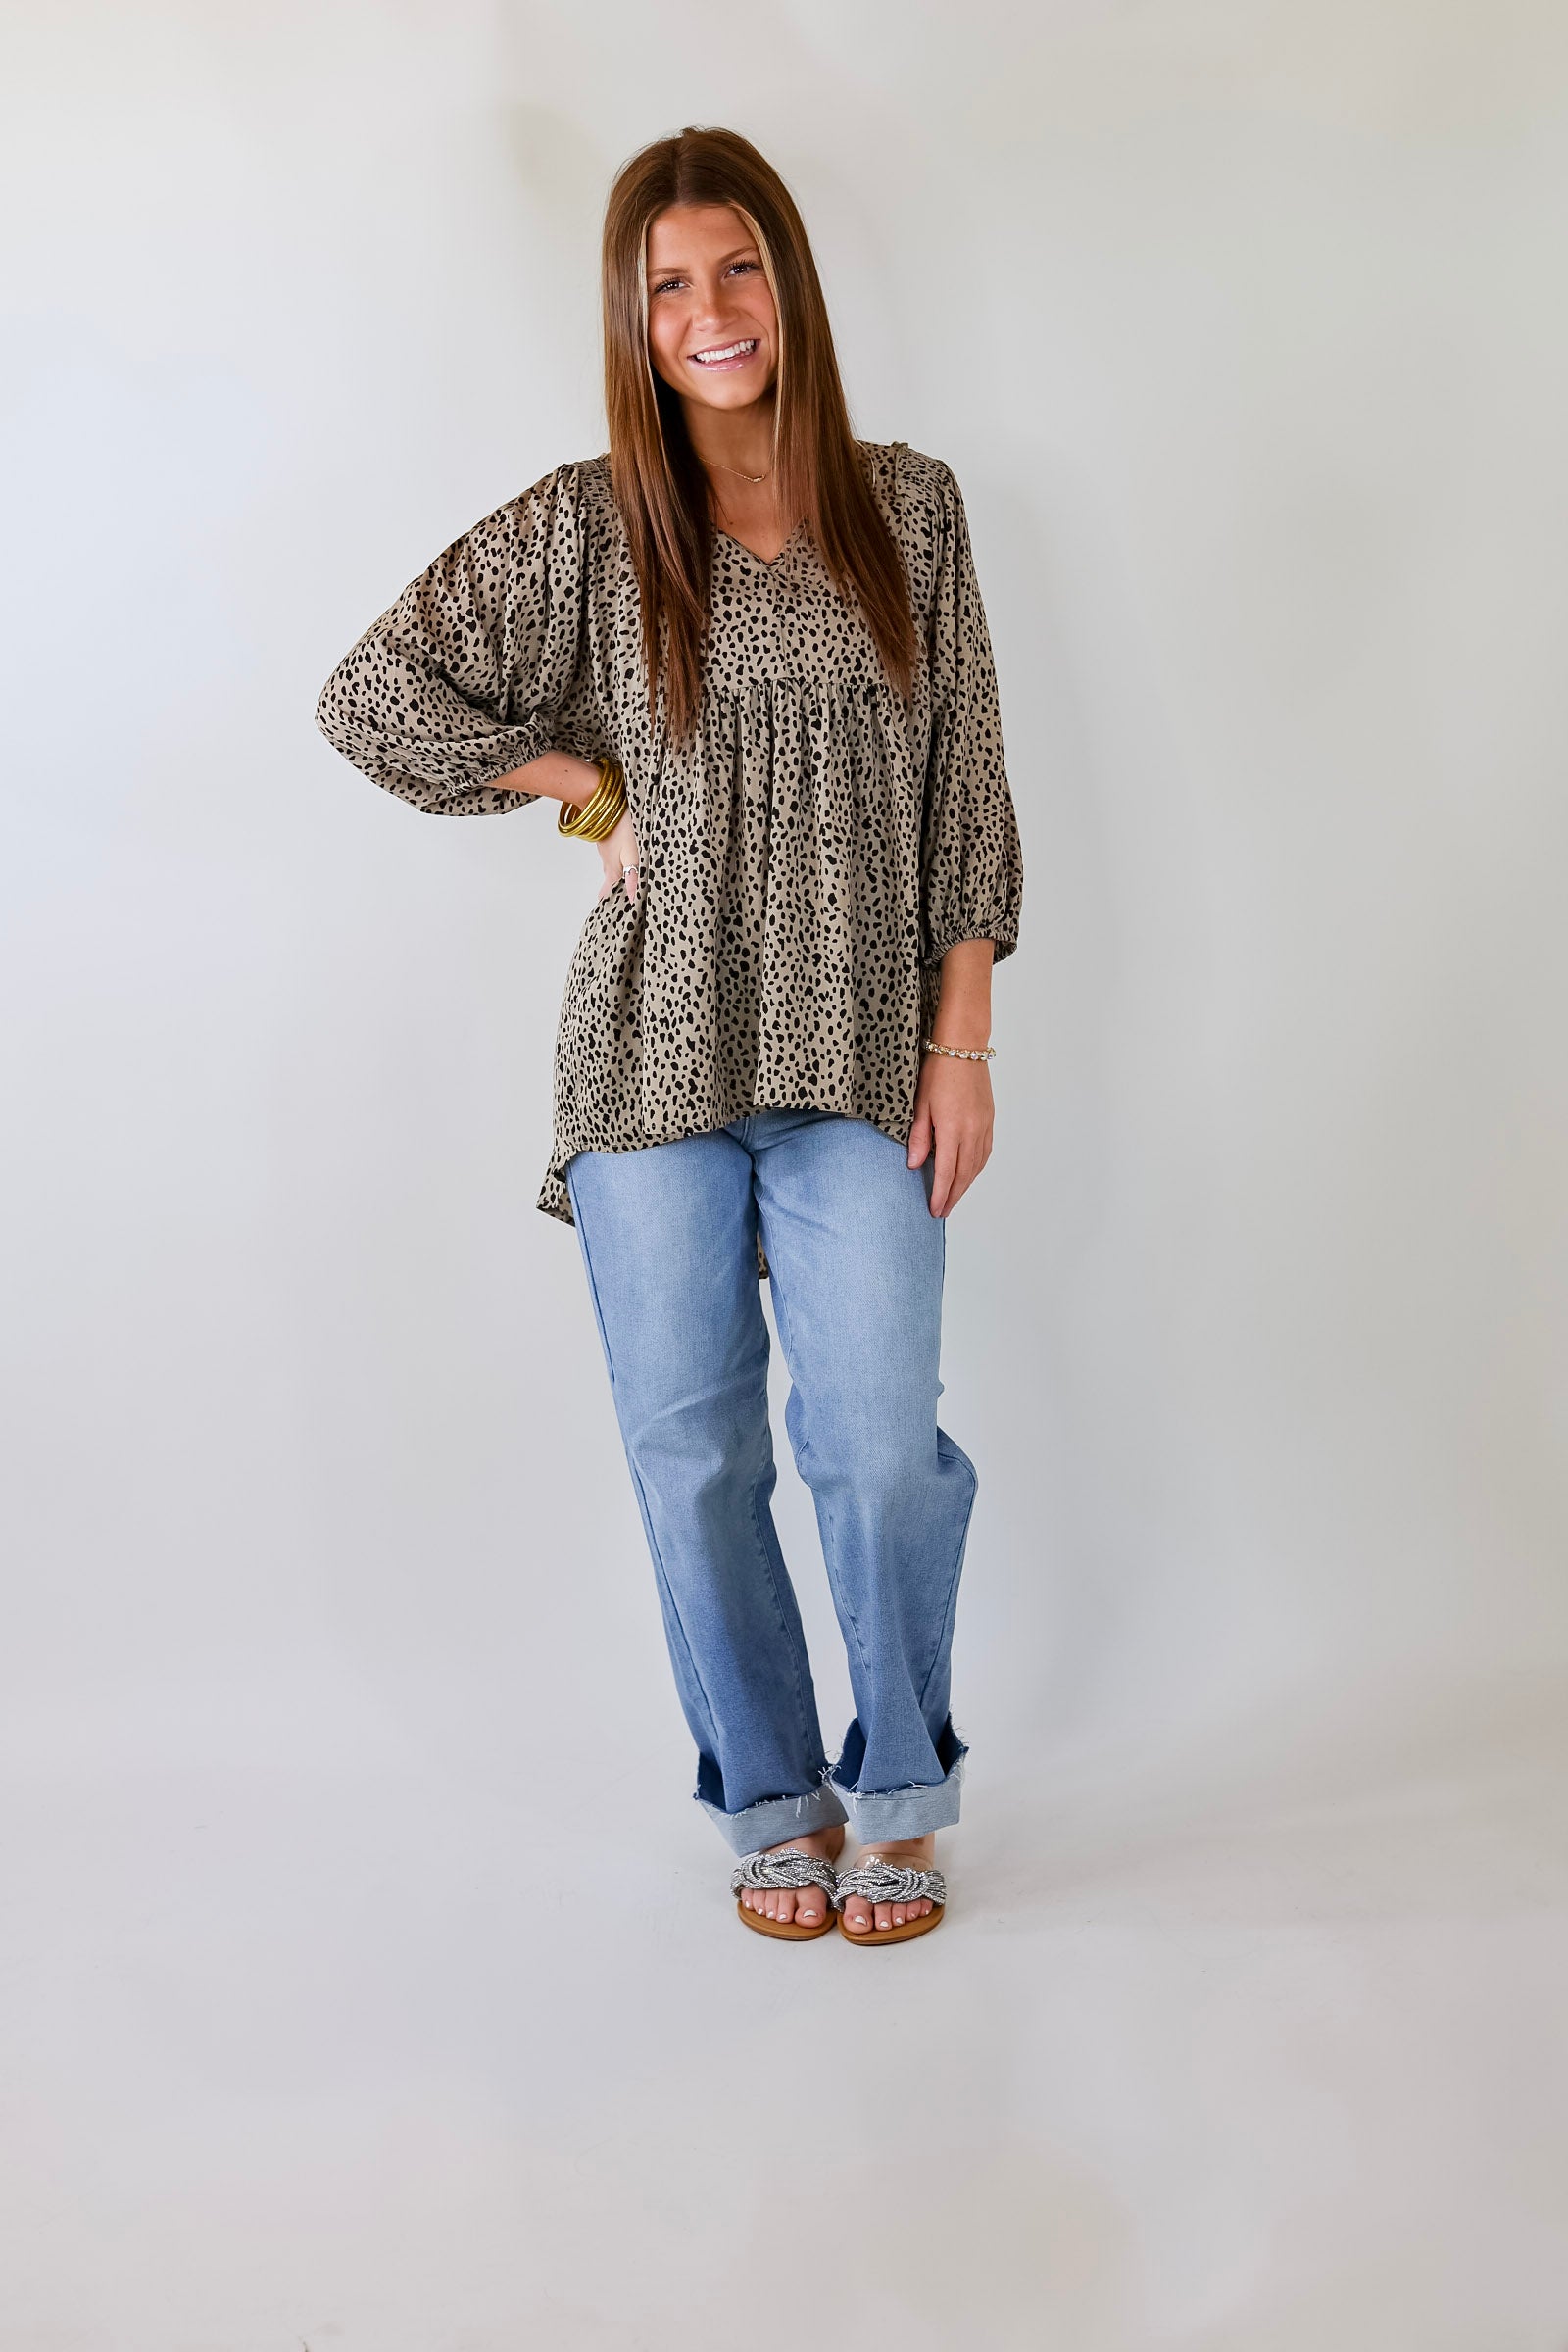 Charming Day Dotted Babydoll Top with Ruched Shoulders in Taupe - Giddy Up Glamour Boutique